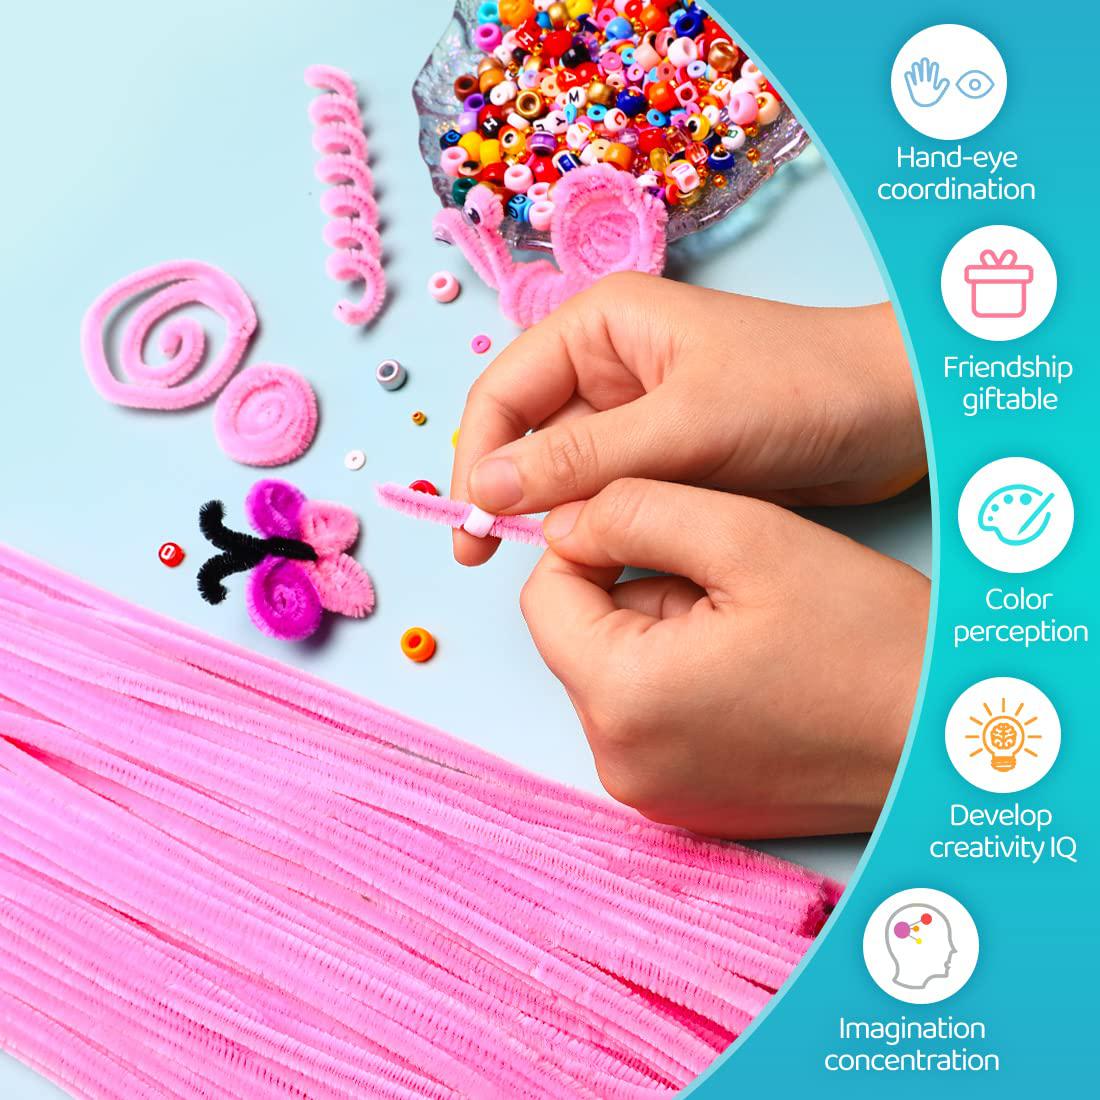 iooleem 200pcs pink pipe cleaners, chenille stems, pipe cleaners for  crafts, pipe cleaner crafts, art and craft supplies.